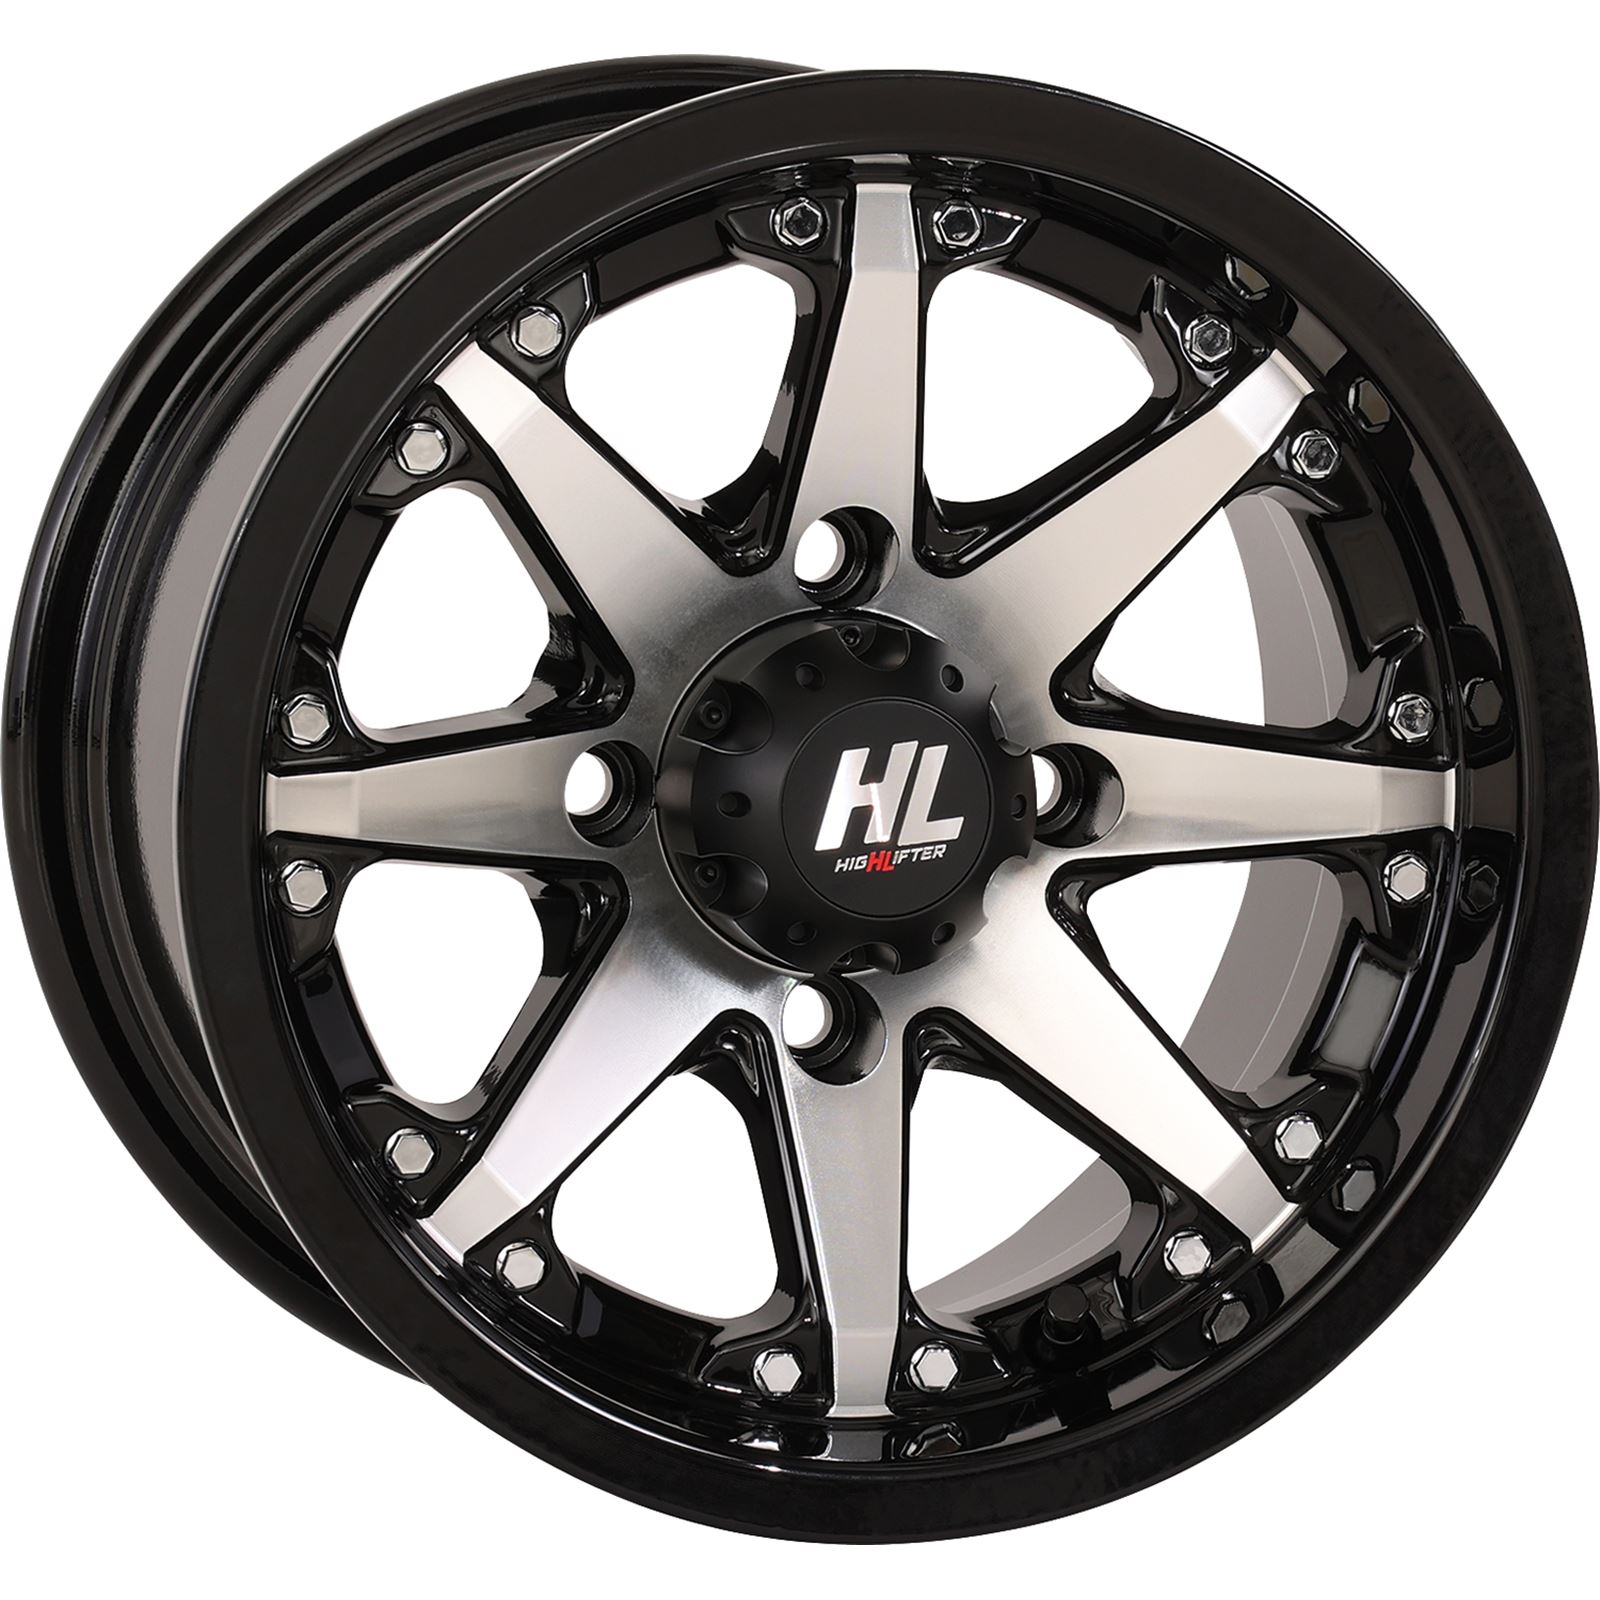 High Lifter Wheel - HL10 - Front/Rear - Gloss Black with Machined - 12x7 - 4/110